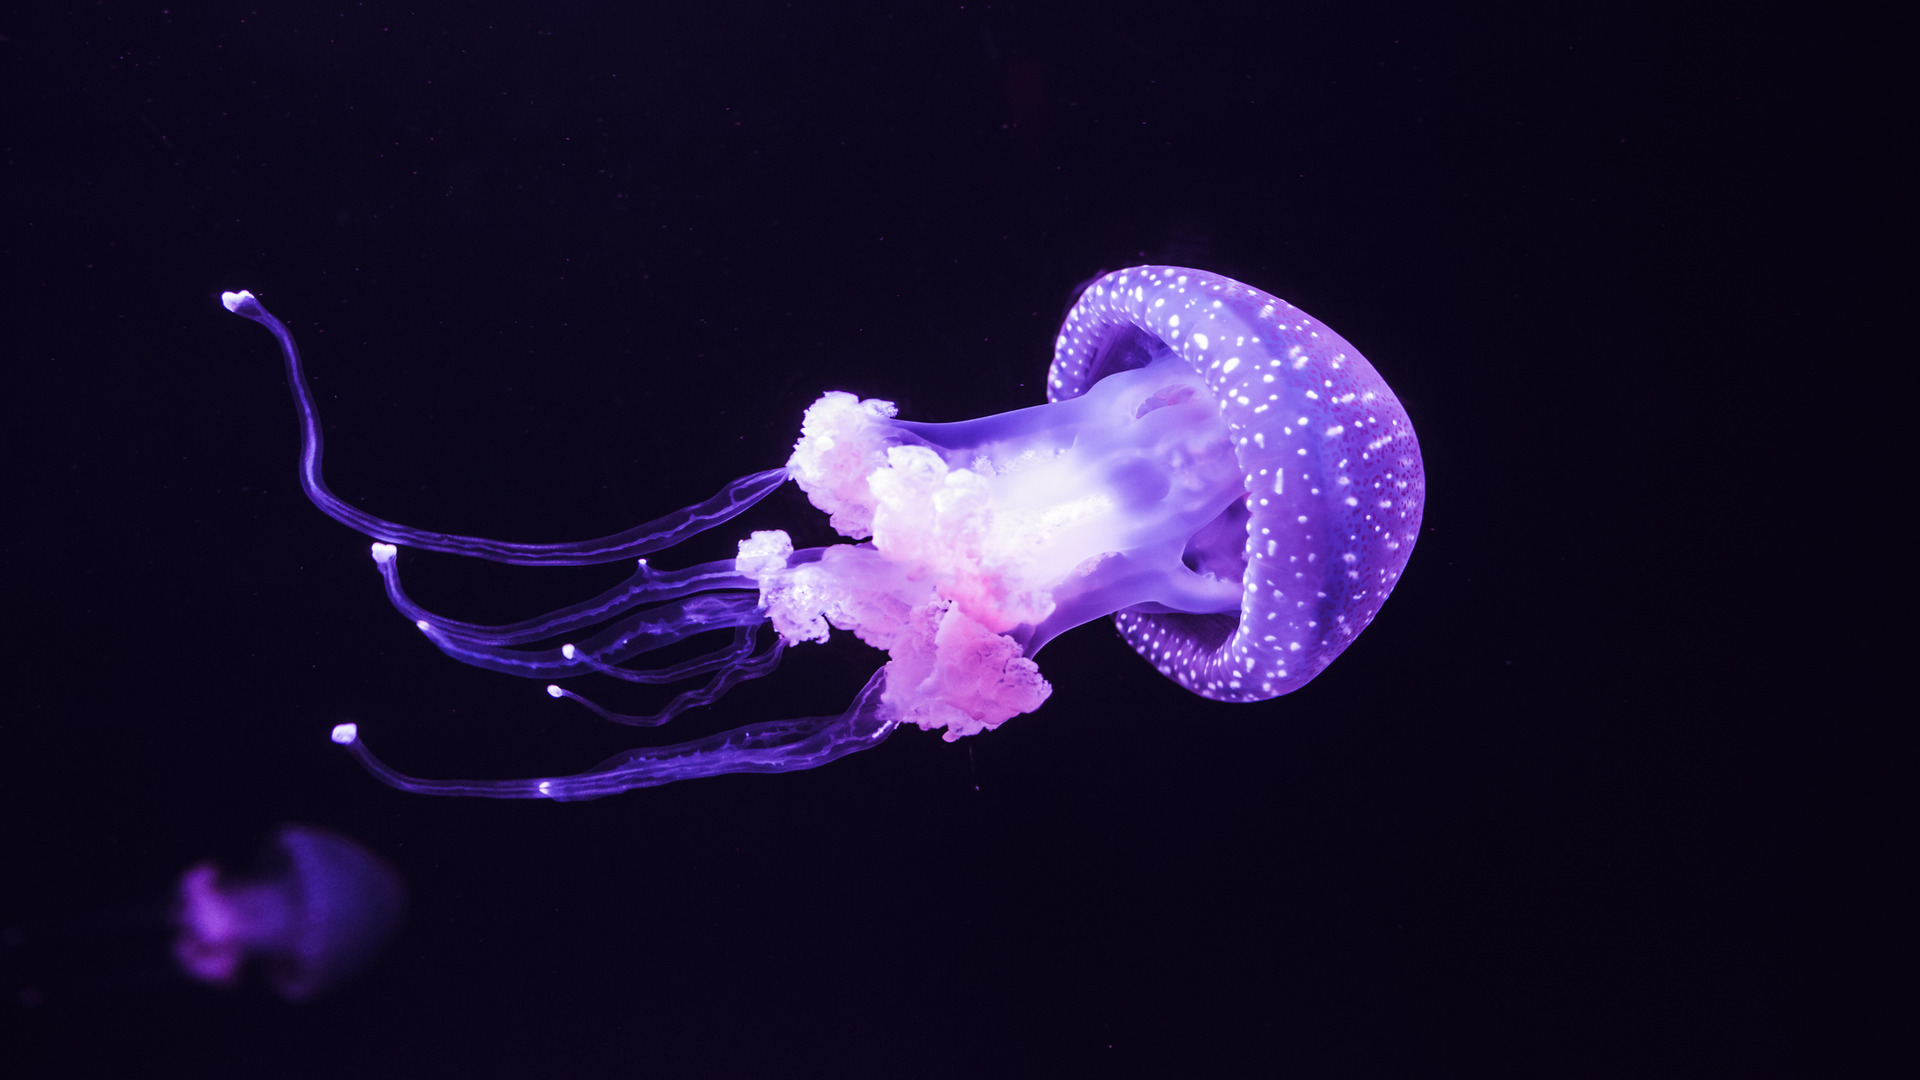 Caltech scientists turn jellyfish into augmented deep-sea explorers [Video]